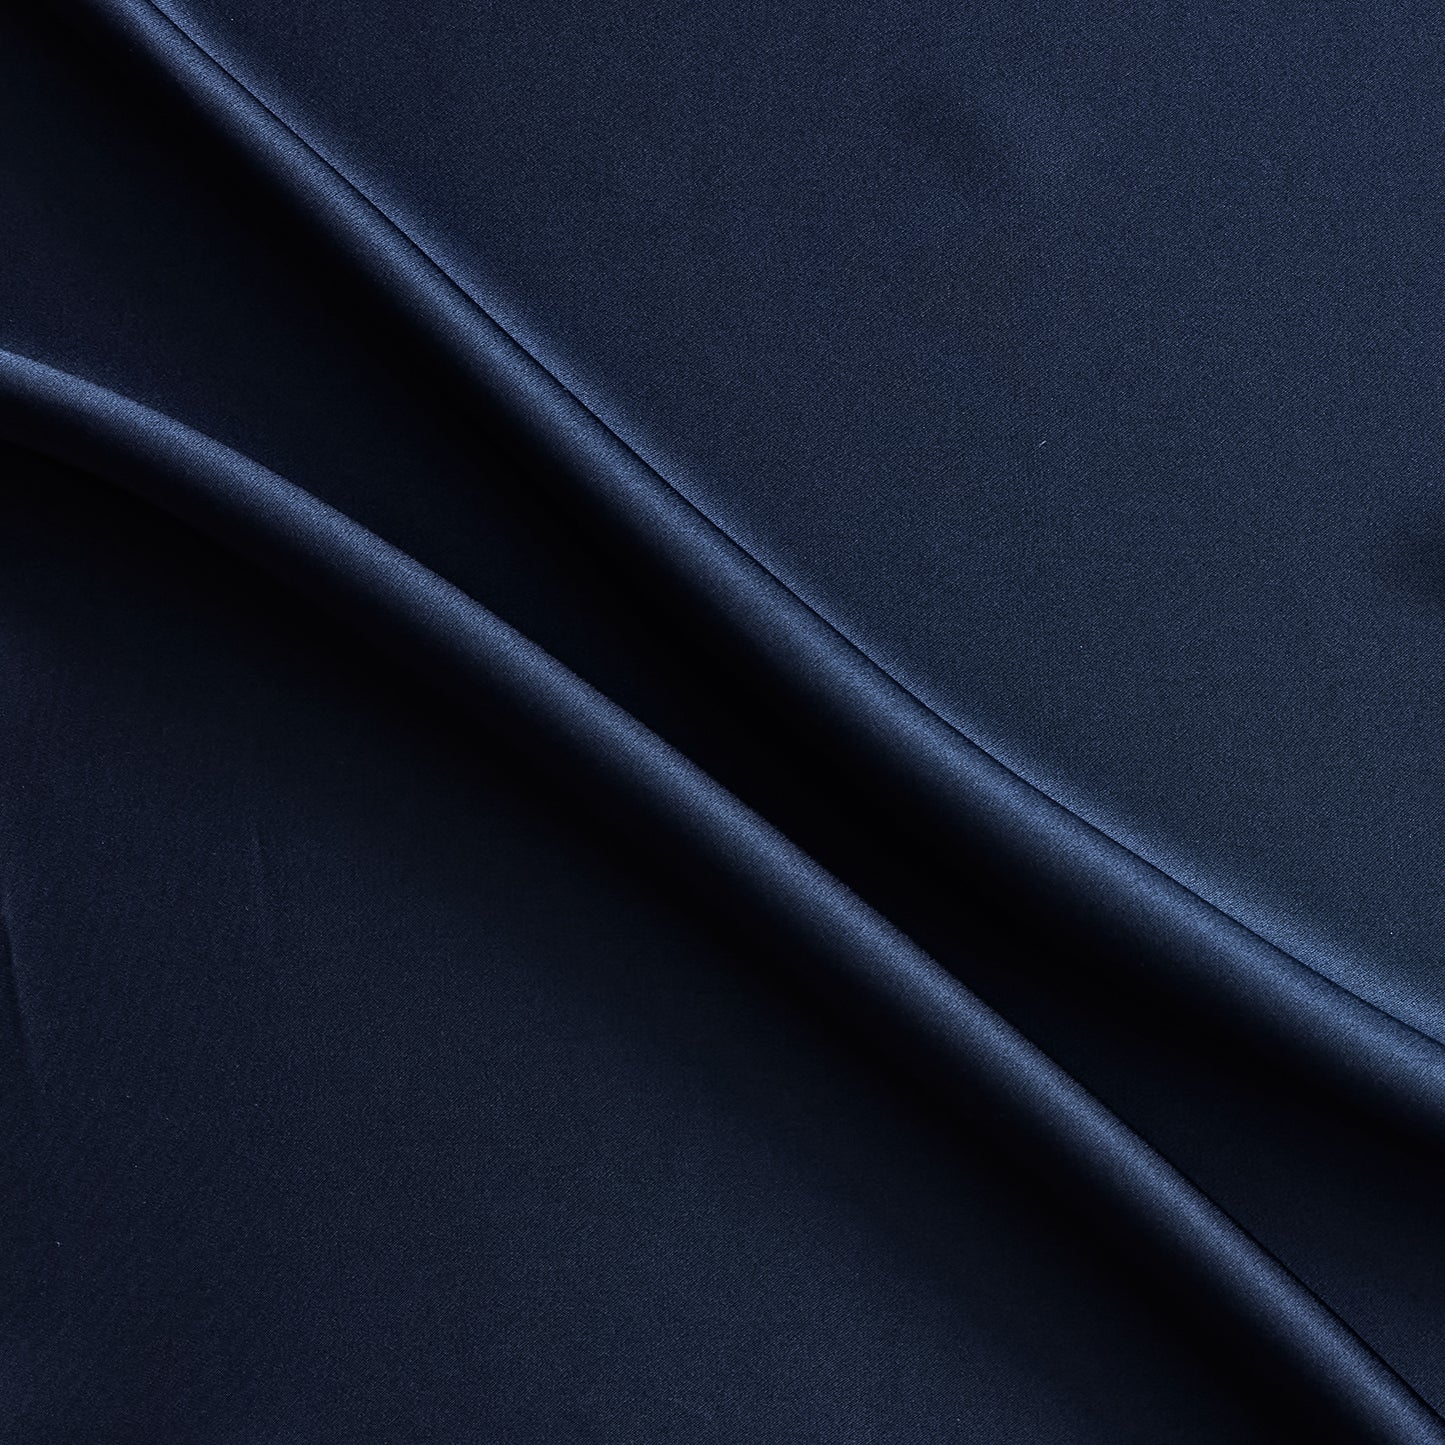 Silk Satin featuring the Ink color version of a Soft Pure mulberry silk with natural sheen and fluid drape